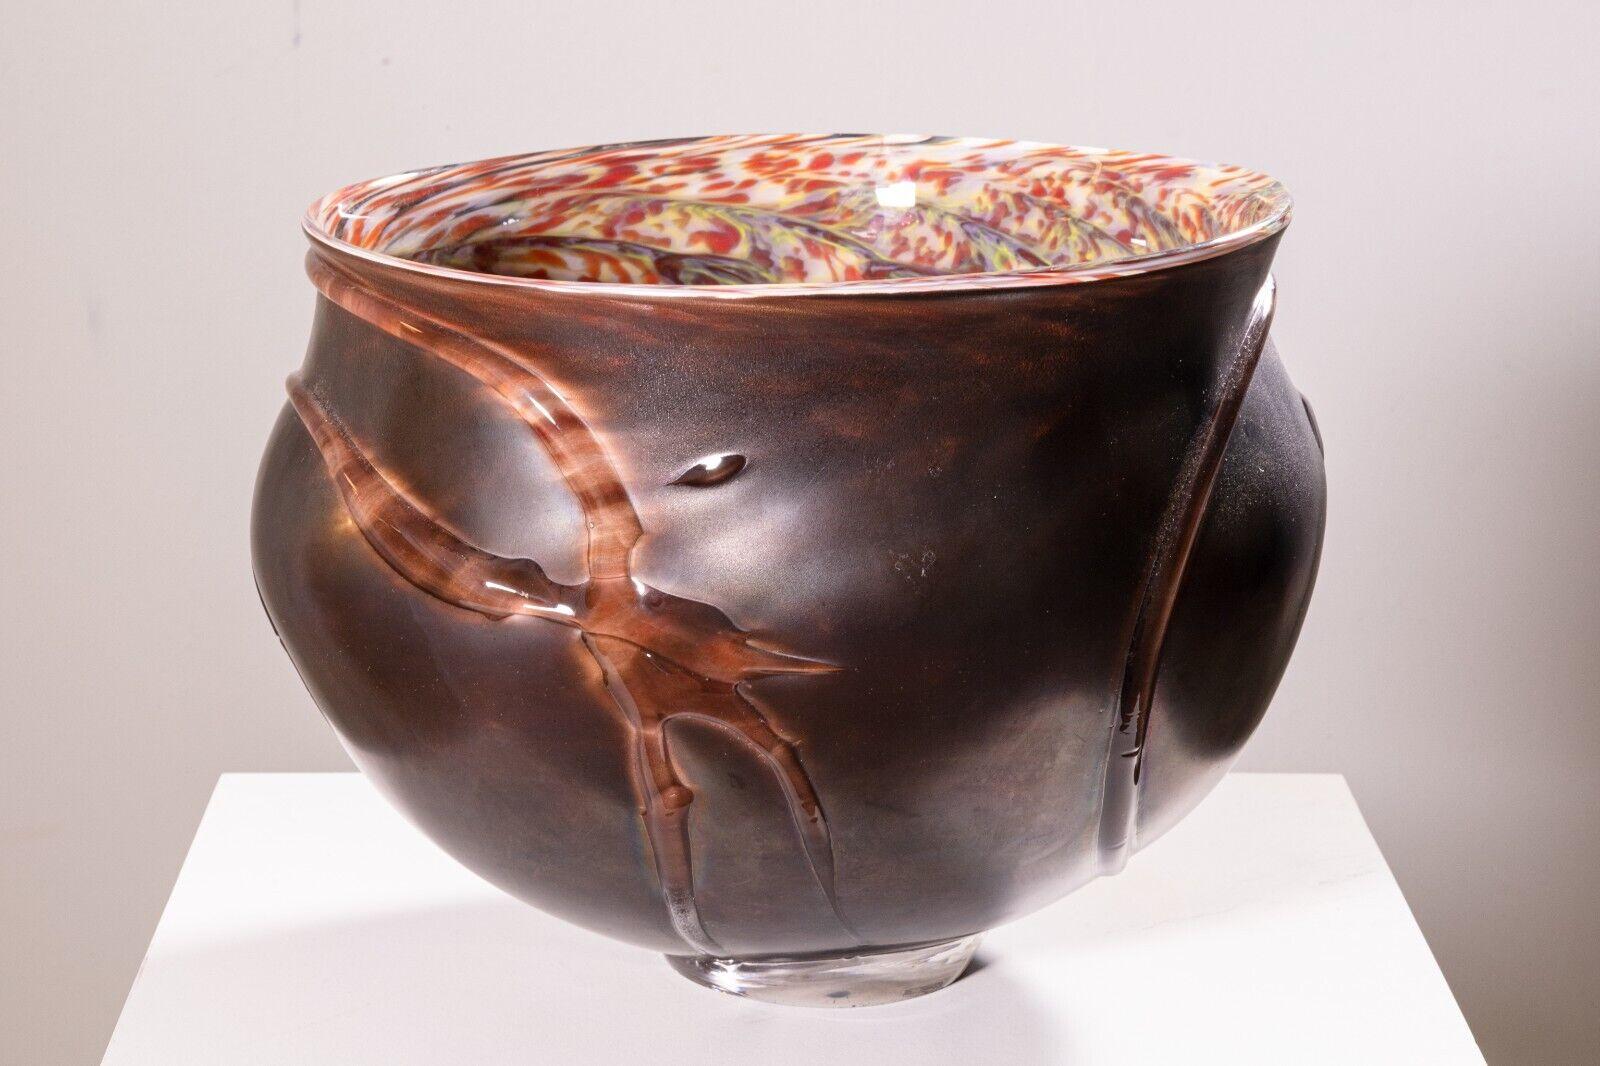 A David Helm hand blown glass bowl. This wonderful glass bowl has been hand blown by glass artist David Helm. The details in this piece are absolutely stunning. The outside of the bowl features an opaque brown finish with splotches of clear glass